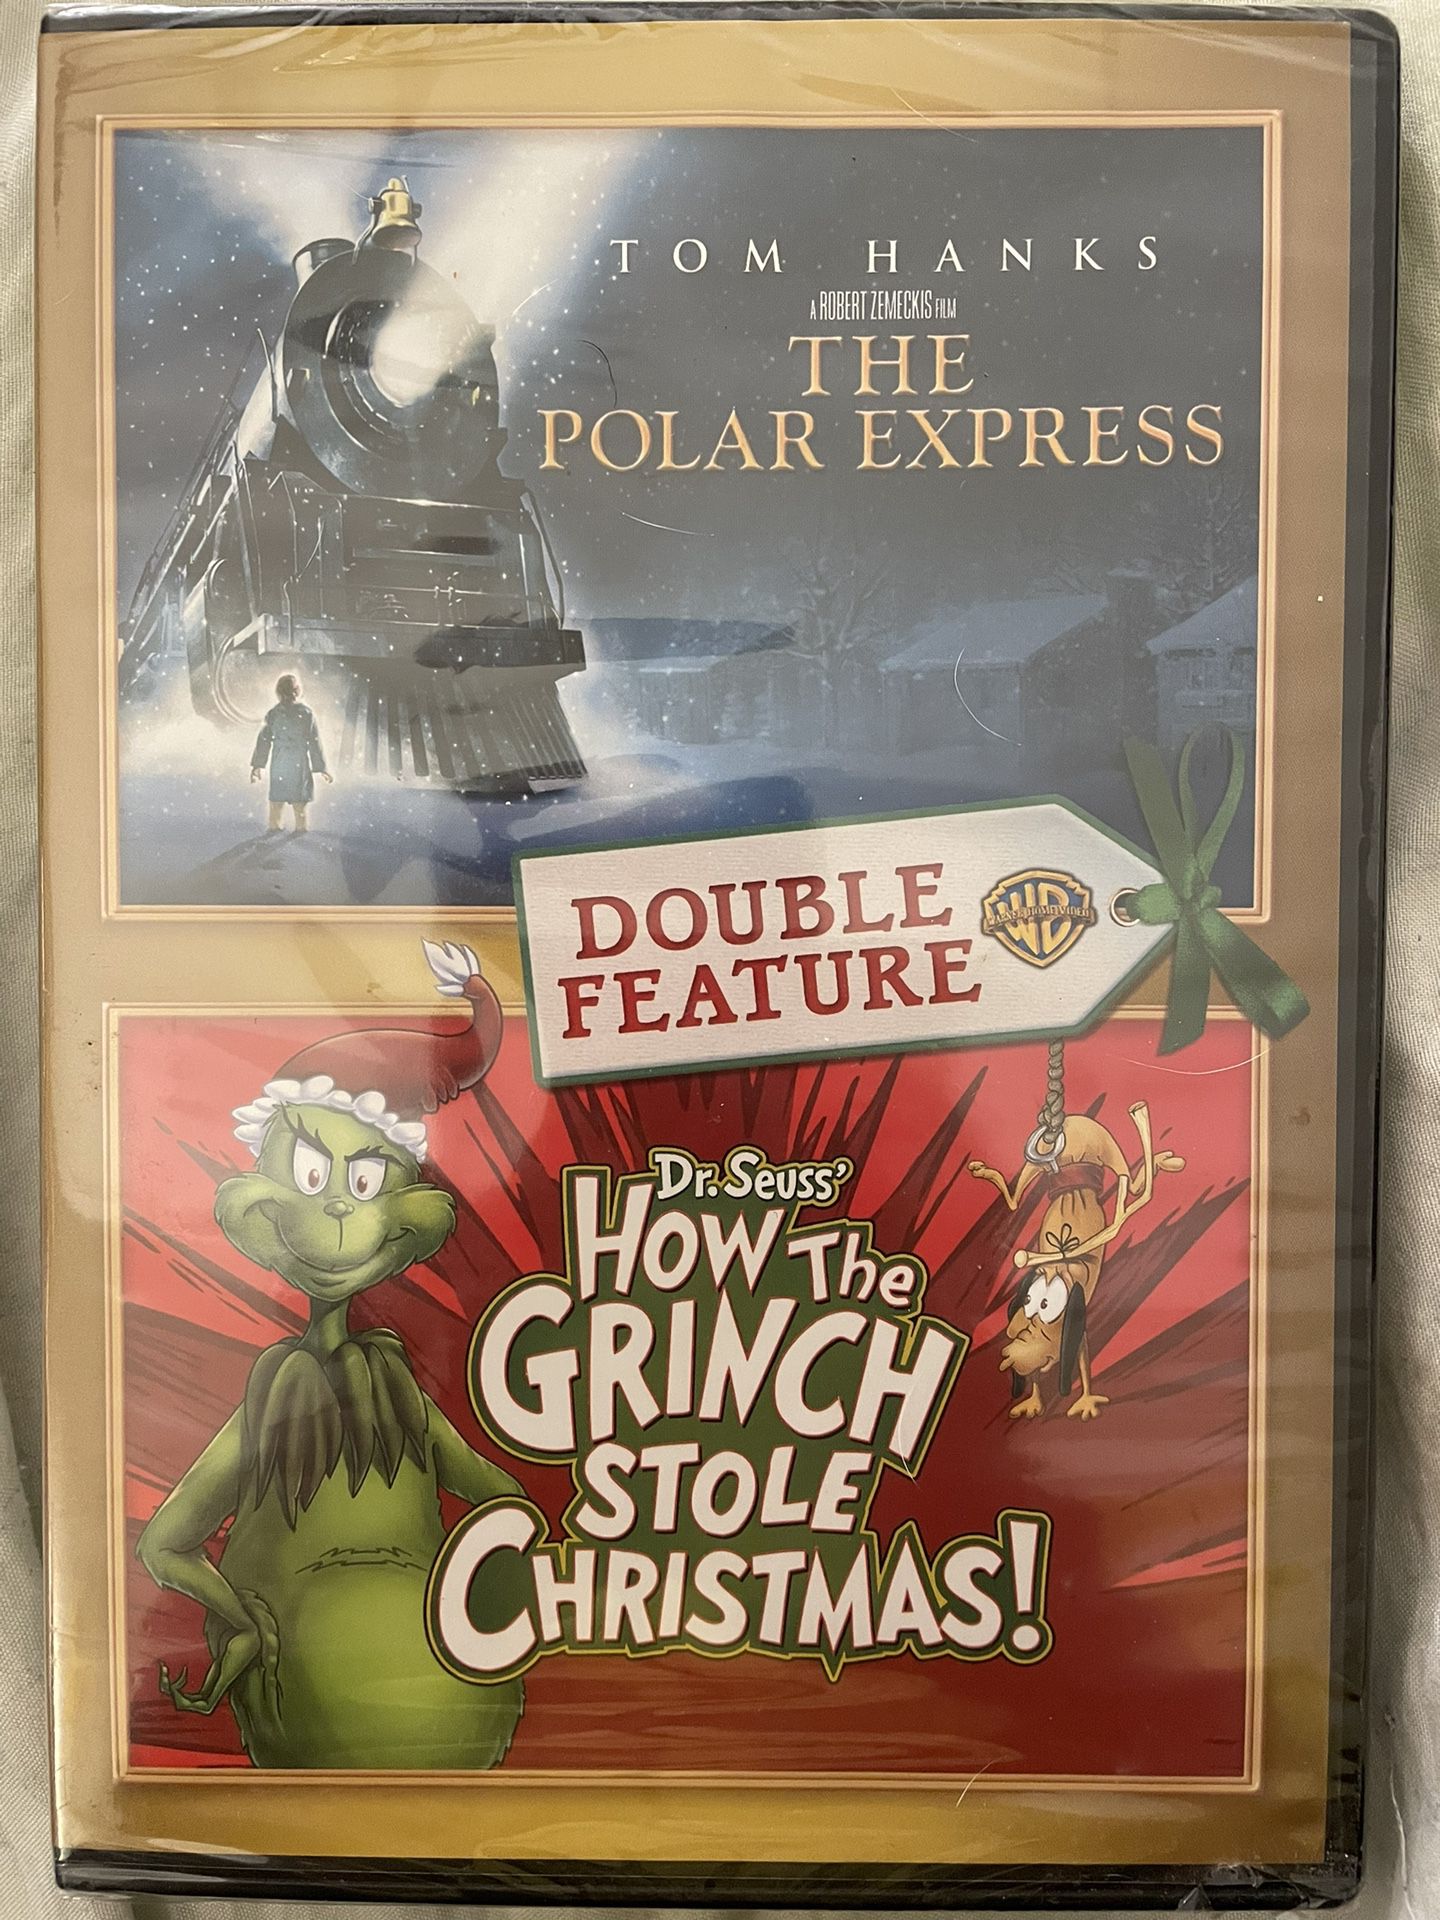 THE POLAR EXPRESS / HOW THE GRINCH STOLE CHRISTMAS! DOUBLE FEATURE (DVD) NEW